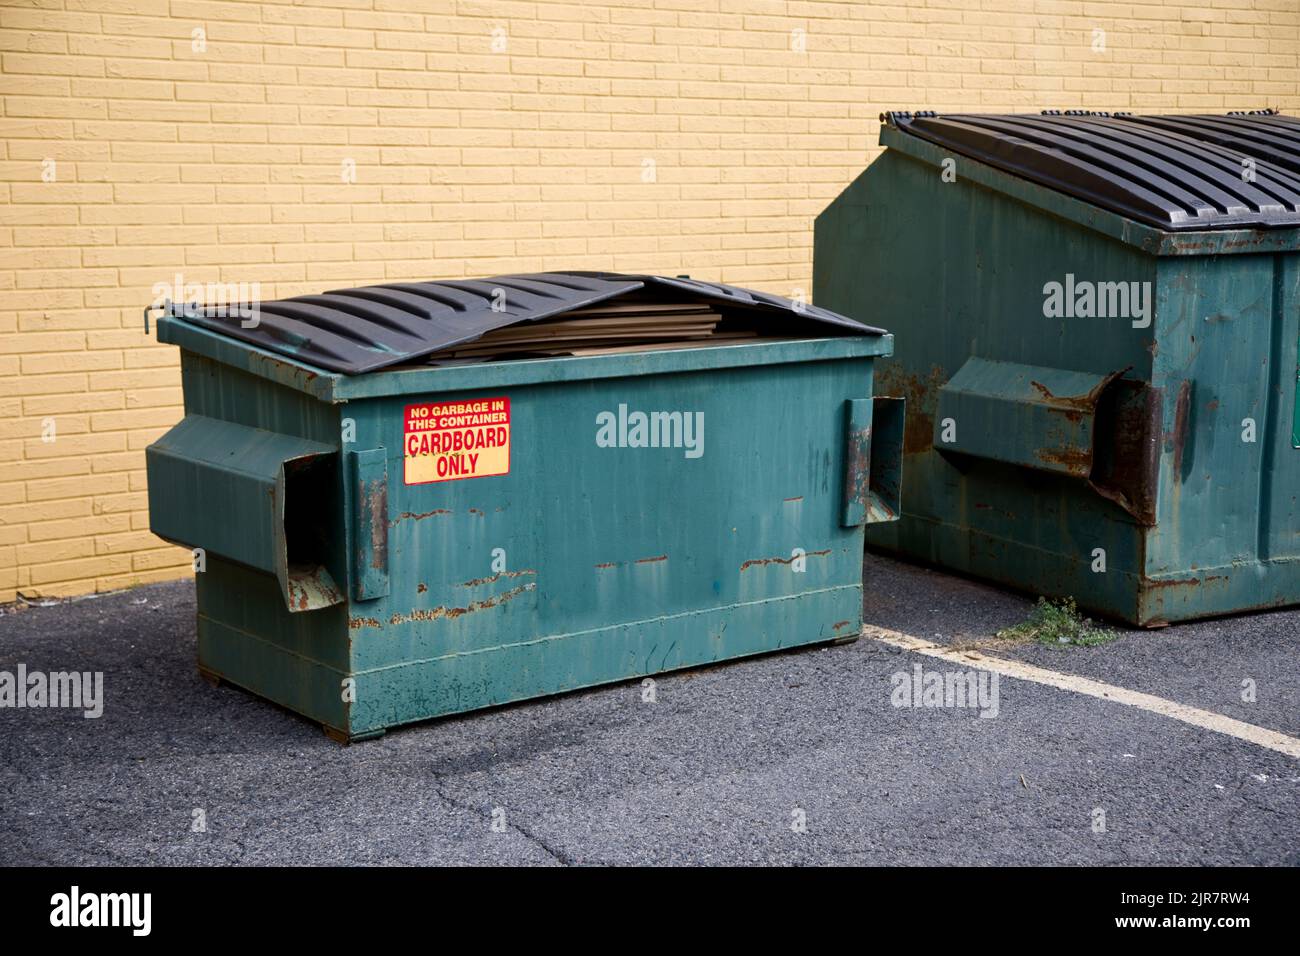 Dumpster containers used for recycling. Stock Photo